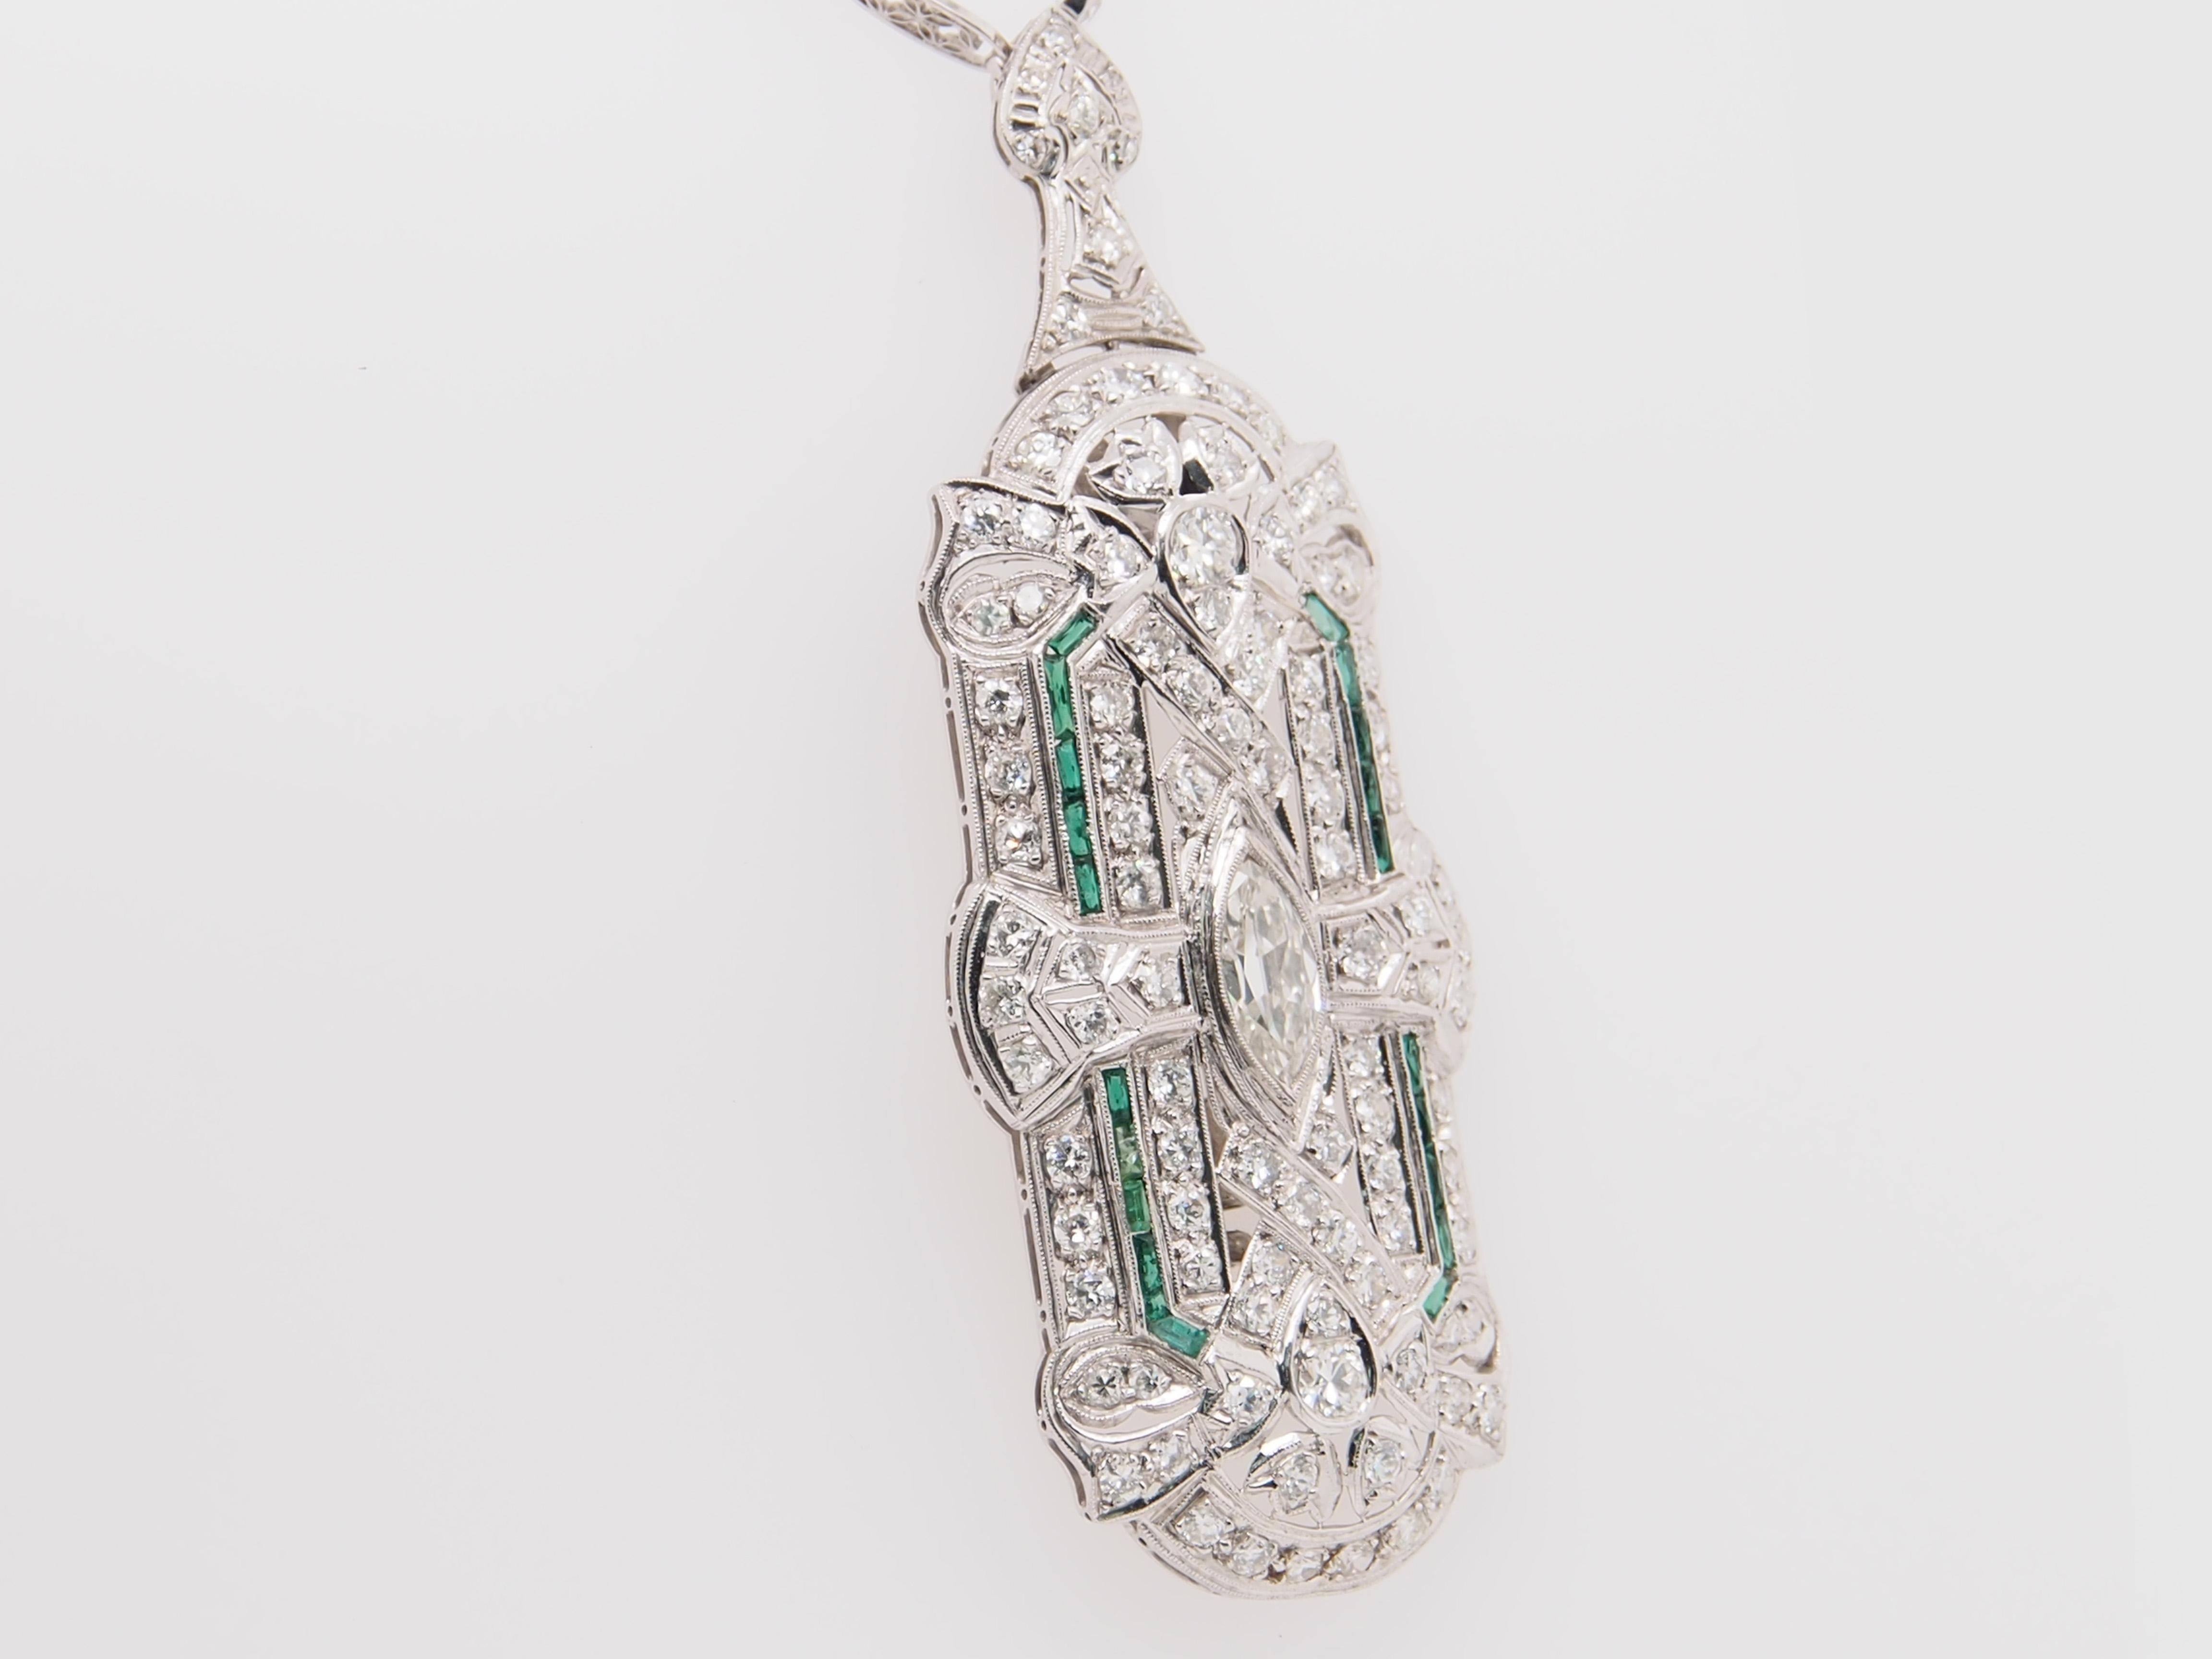 A magnificent Deco Style pendant / brooch / pin and Diamond By The Yard chain in Platinum. The pendant features 1 Marquise Diamond 128 Round Brilliant Cut Diamonds and 20 Baguette Shaped Emeralds. The diamonds weigh 5 carats, G-J in color and VS-SI